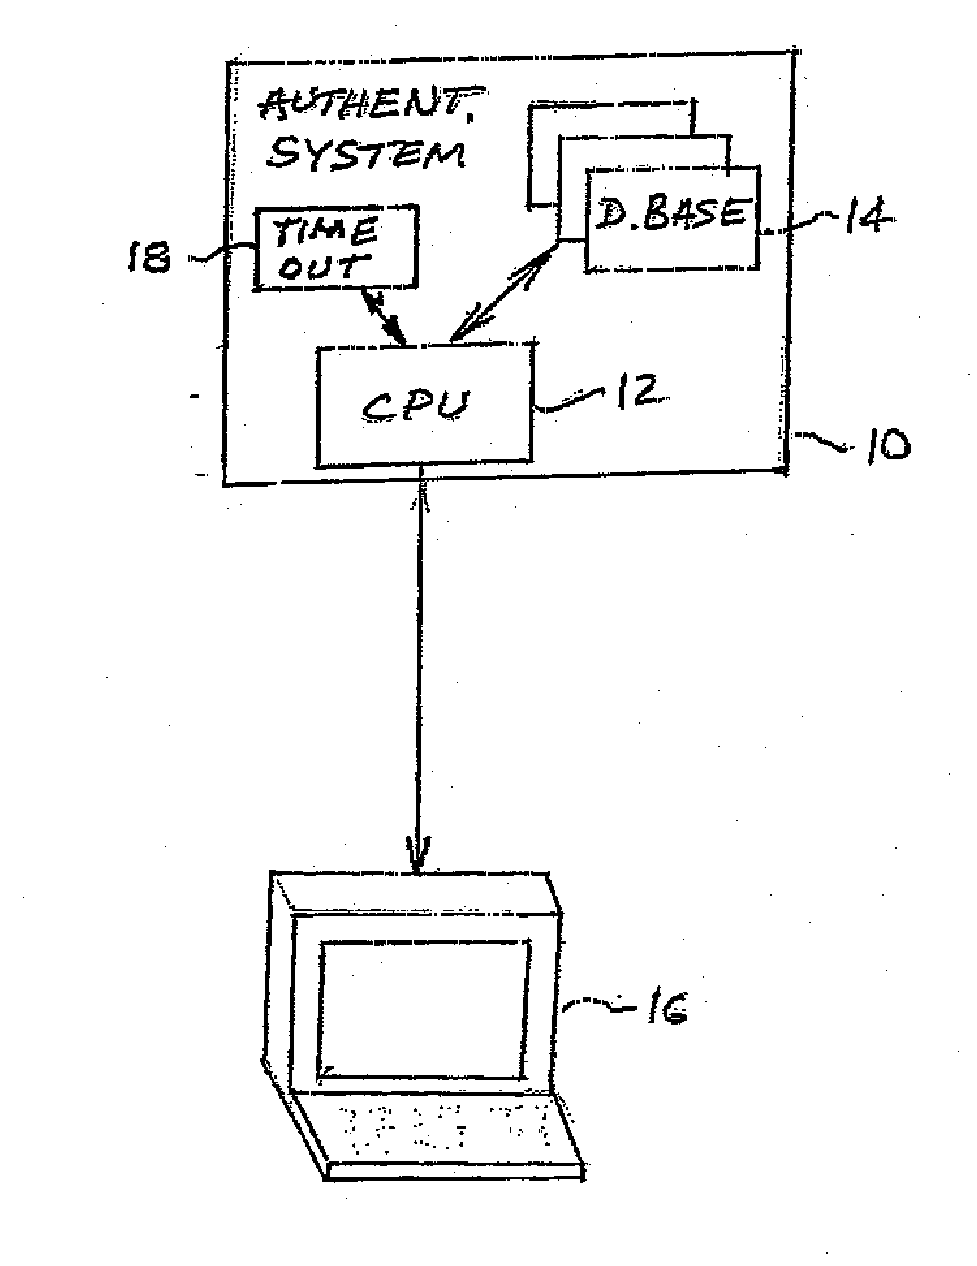 Memory based authentication system